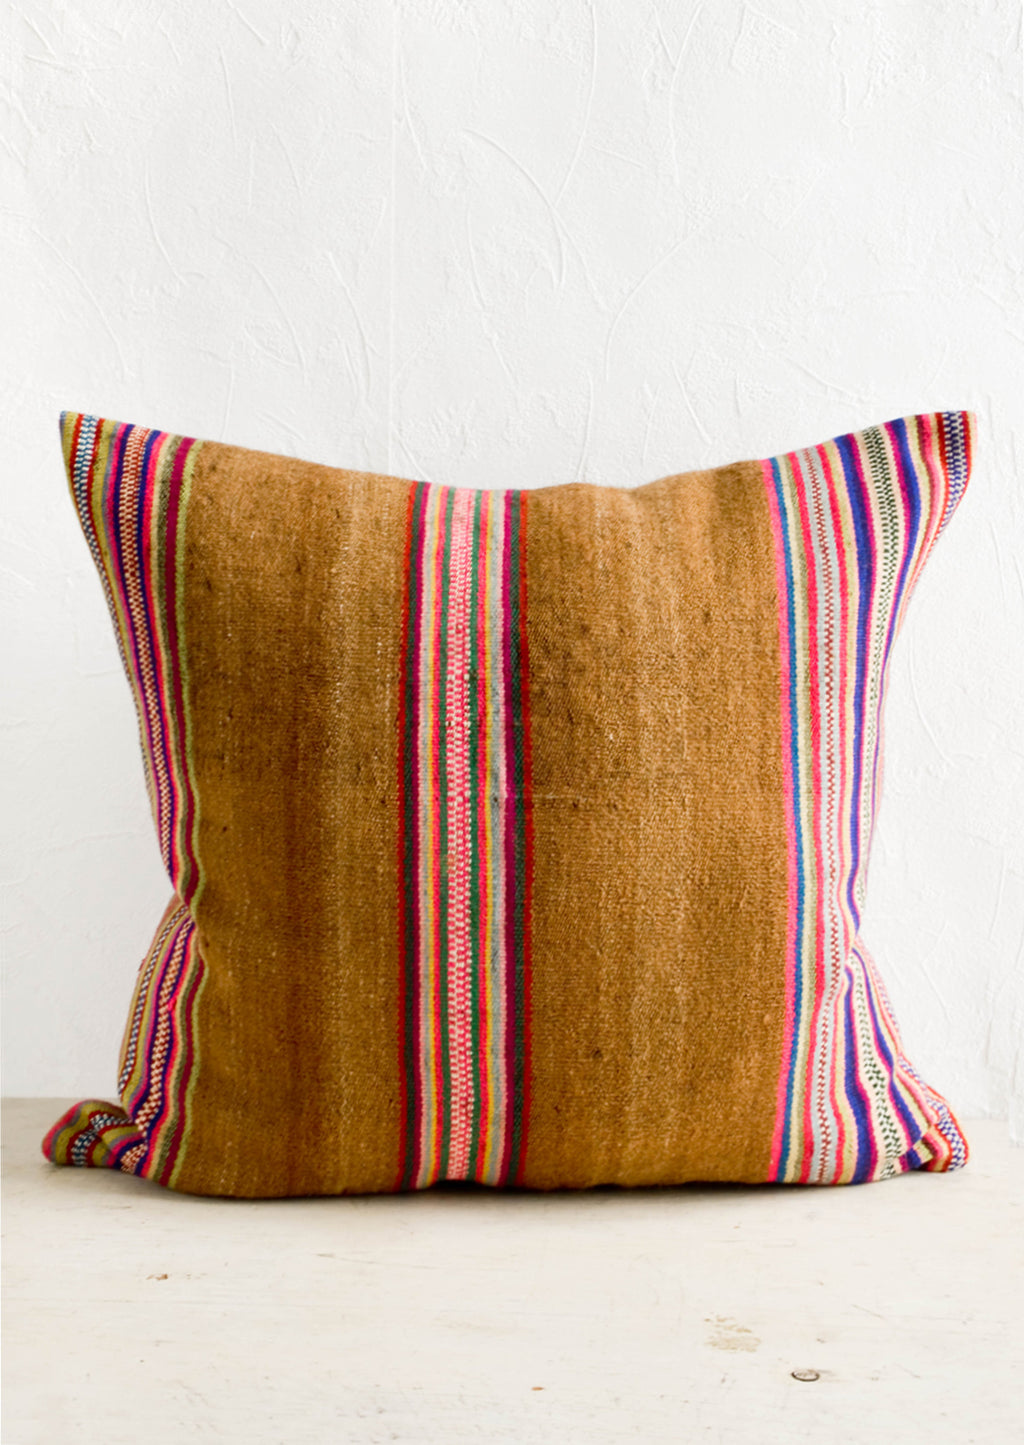 1: Square throw pillow in striped vintage wool fabric. Brown with colorful rainbow stripes.